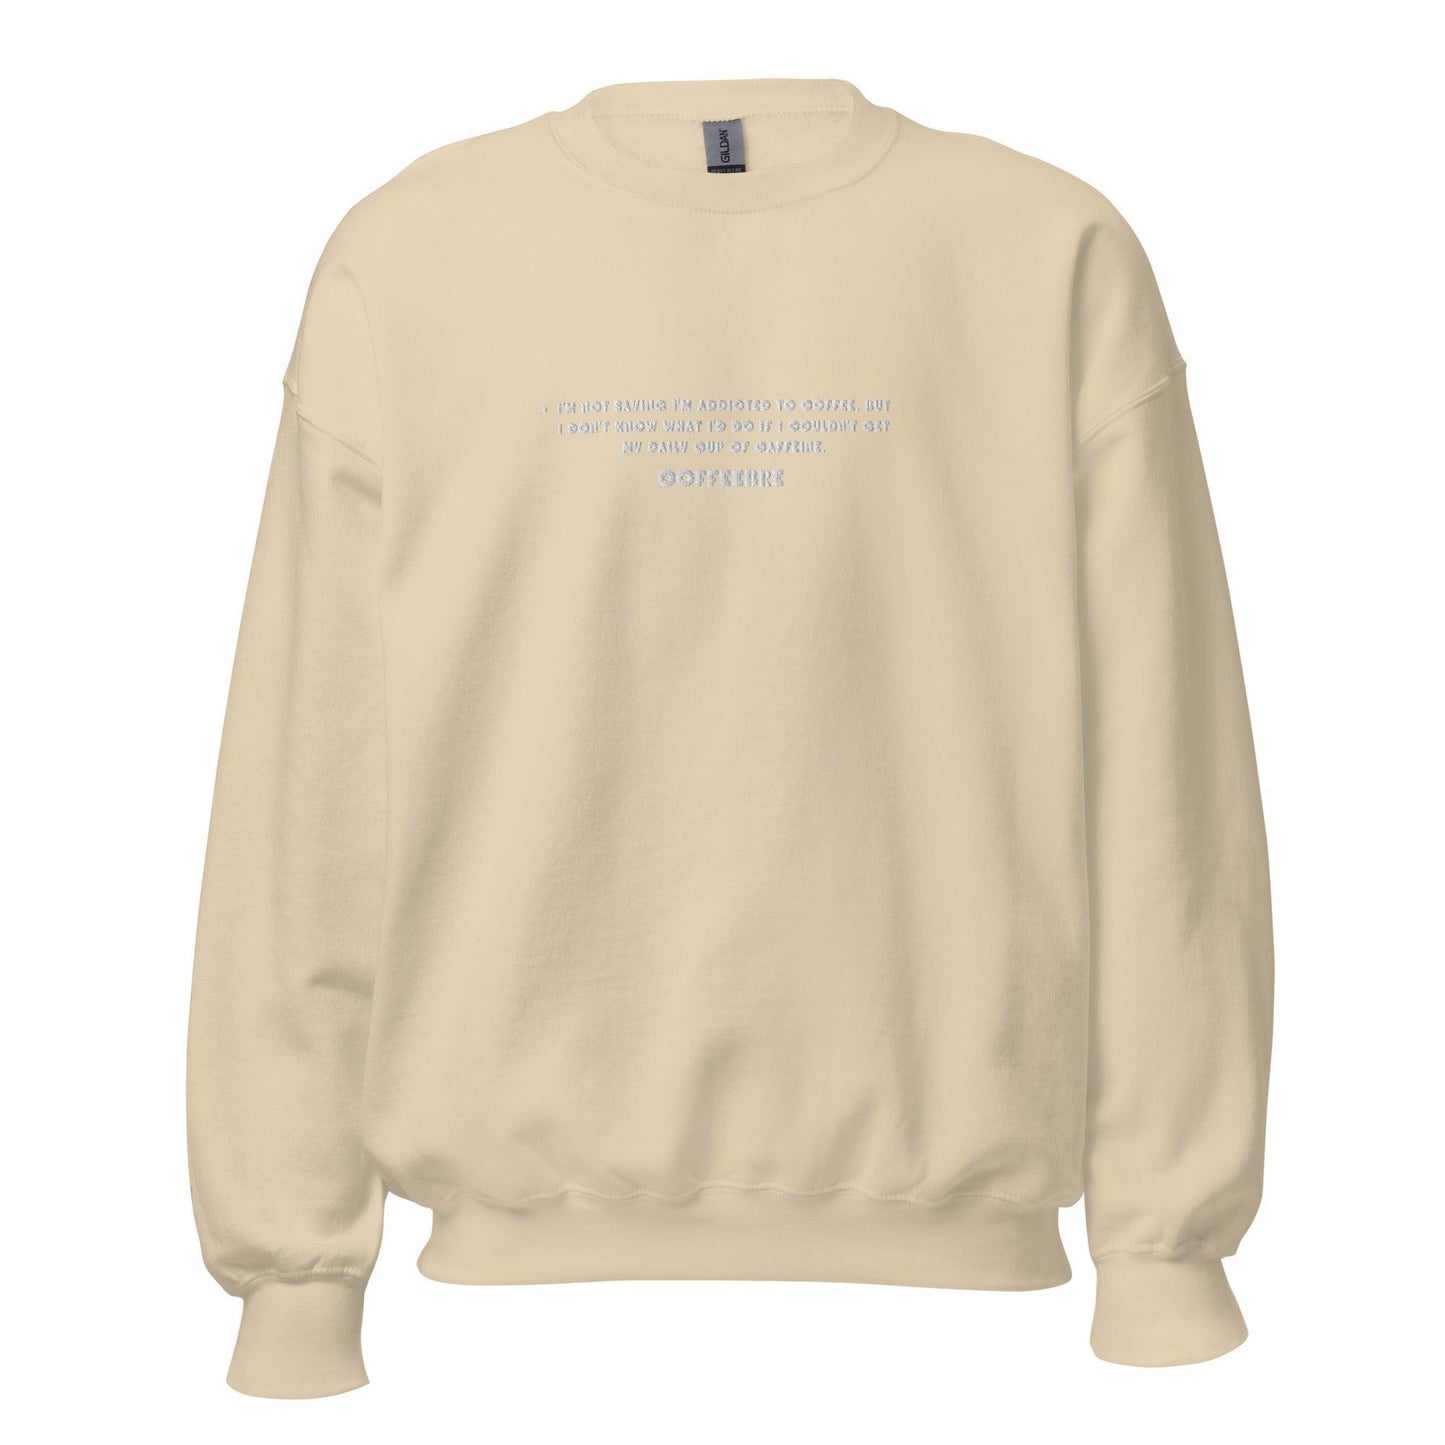 Embroidered Casual Style Unisex Sweatshirt - COFFEEBRE